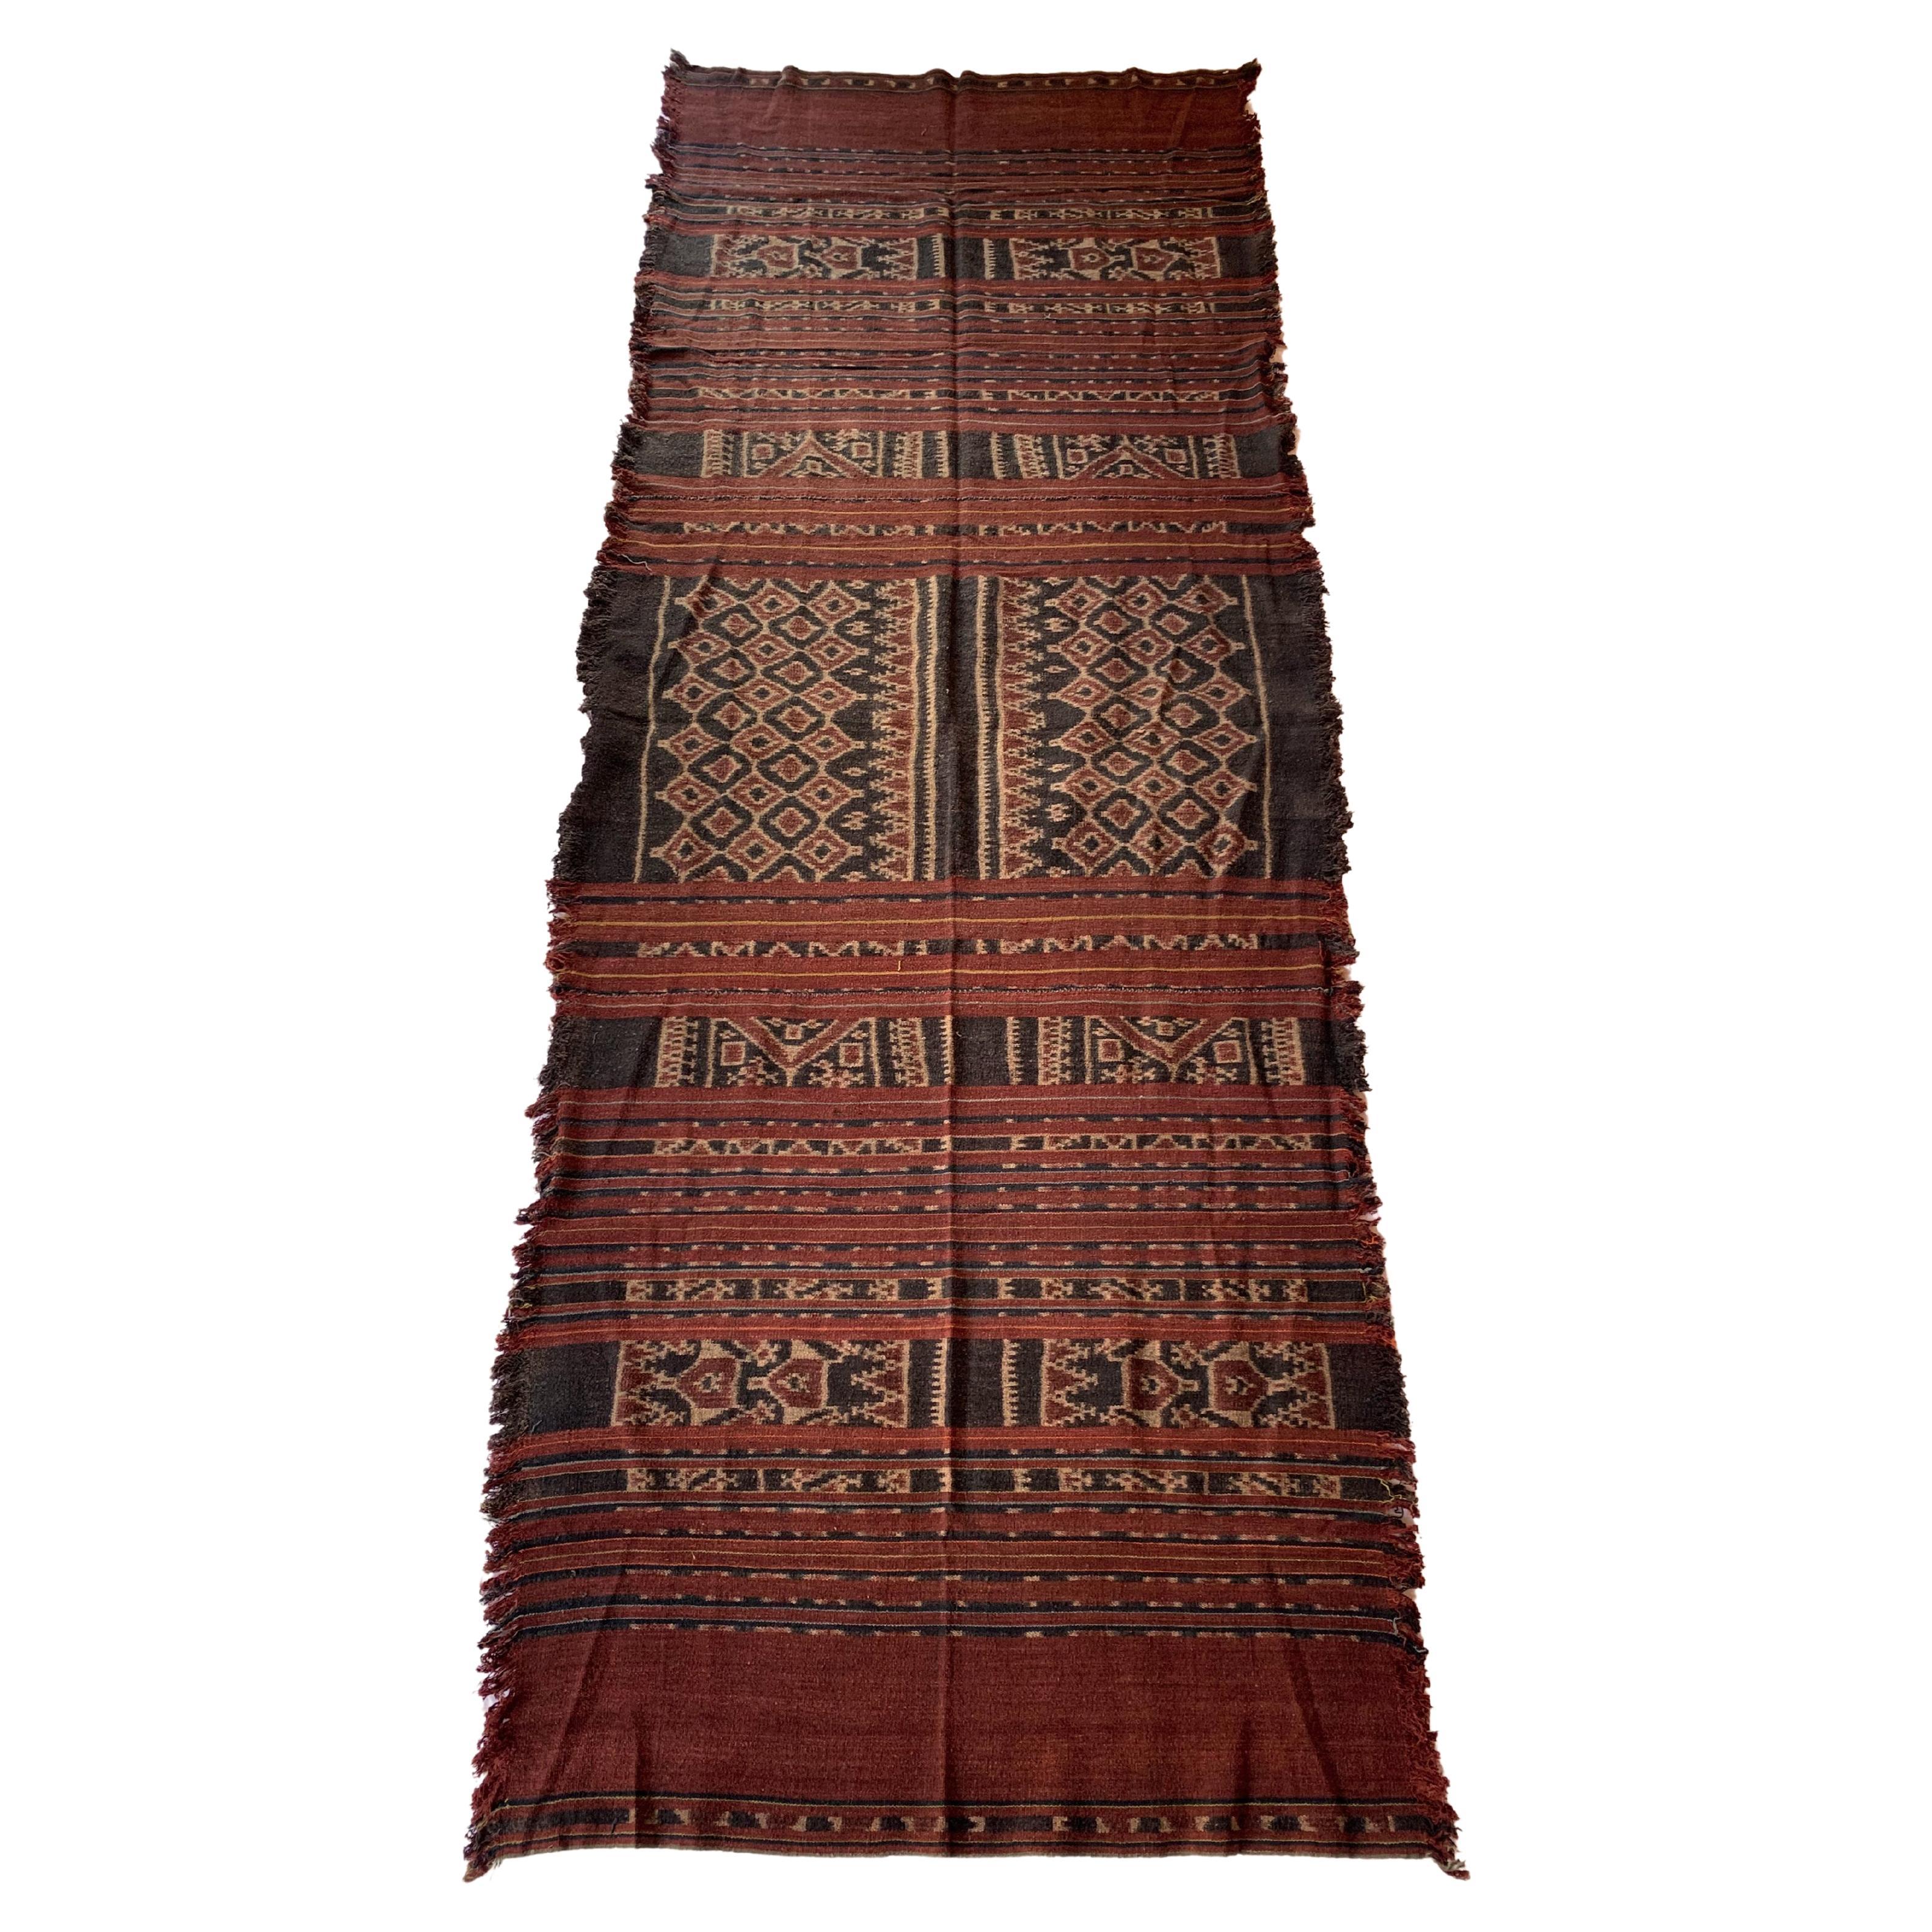 Ikat Textile from Toraja Tribe of Sulawesi with Stunning Tribal Motifs, C. 1920 For Sale